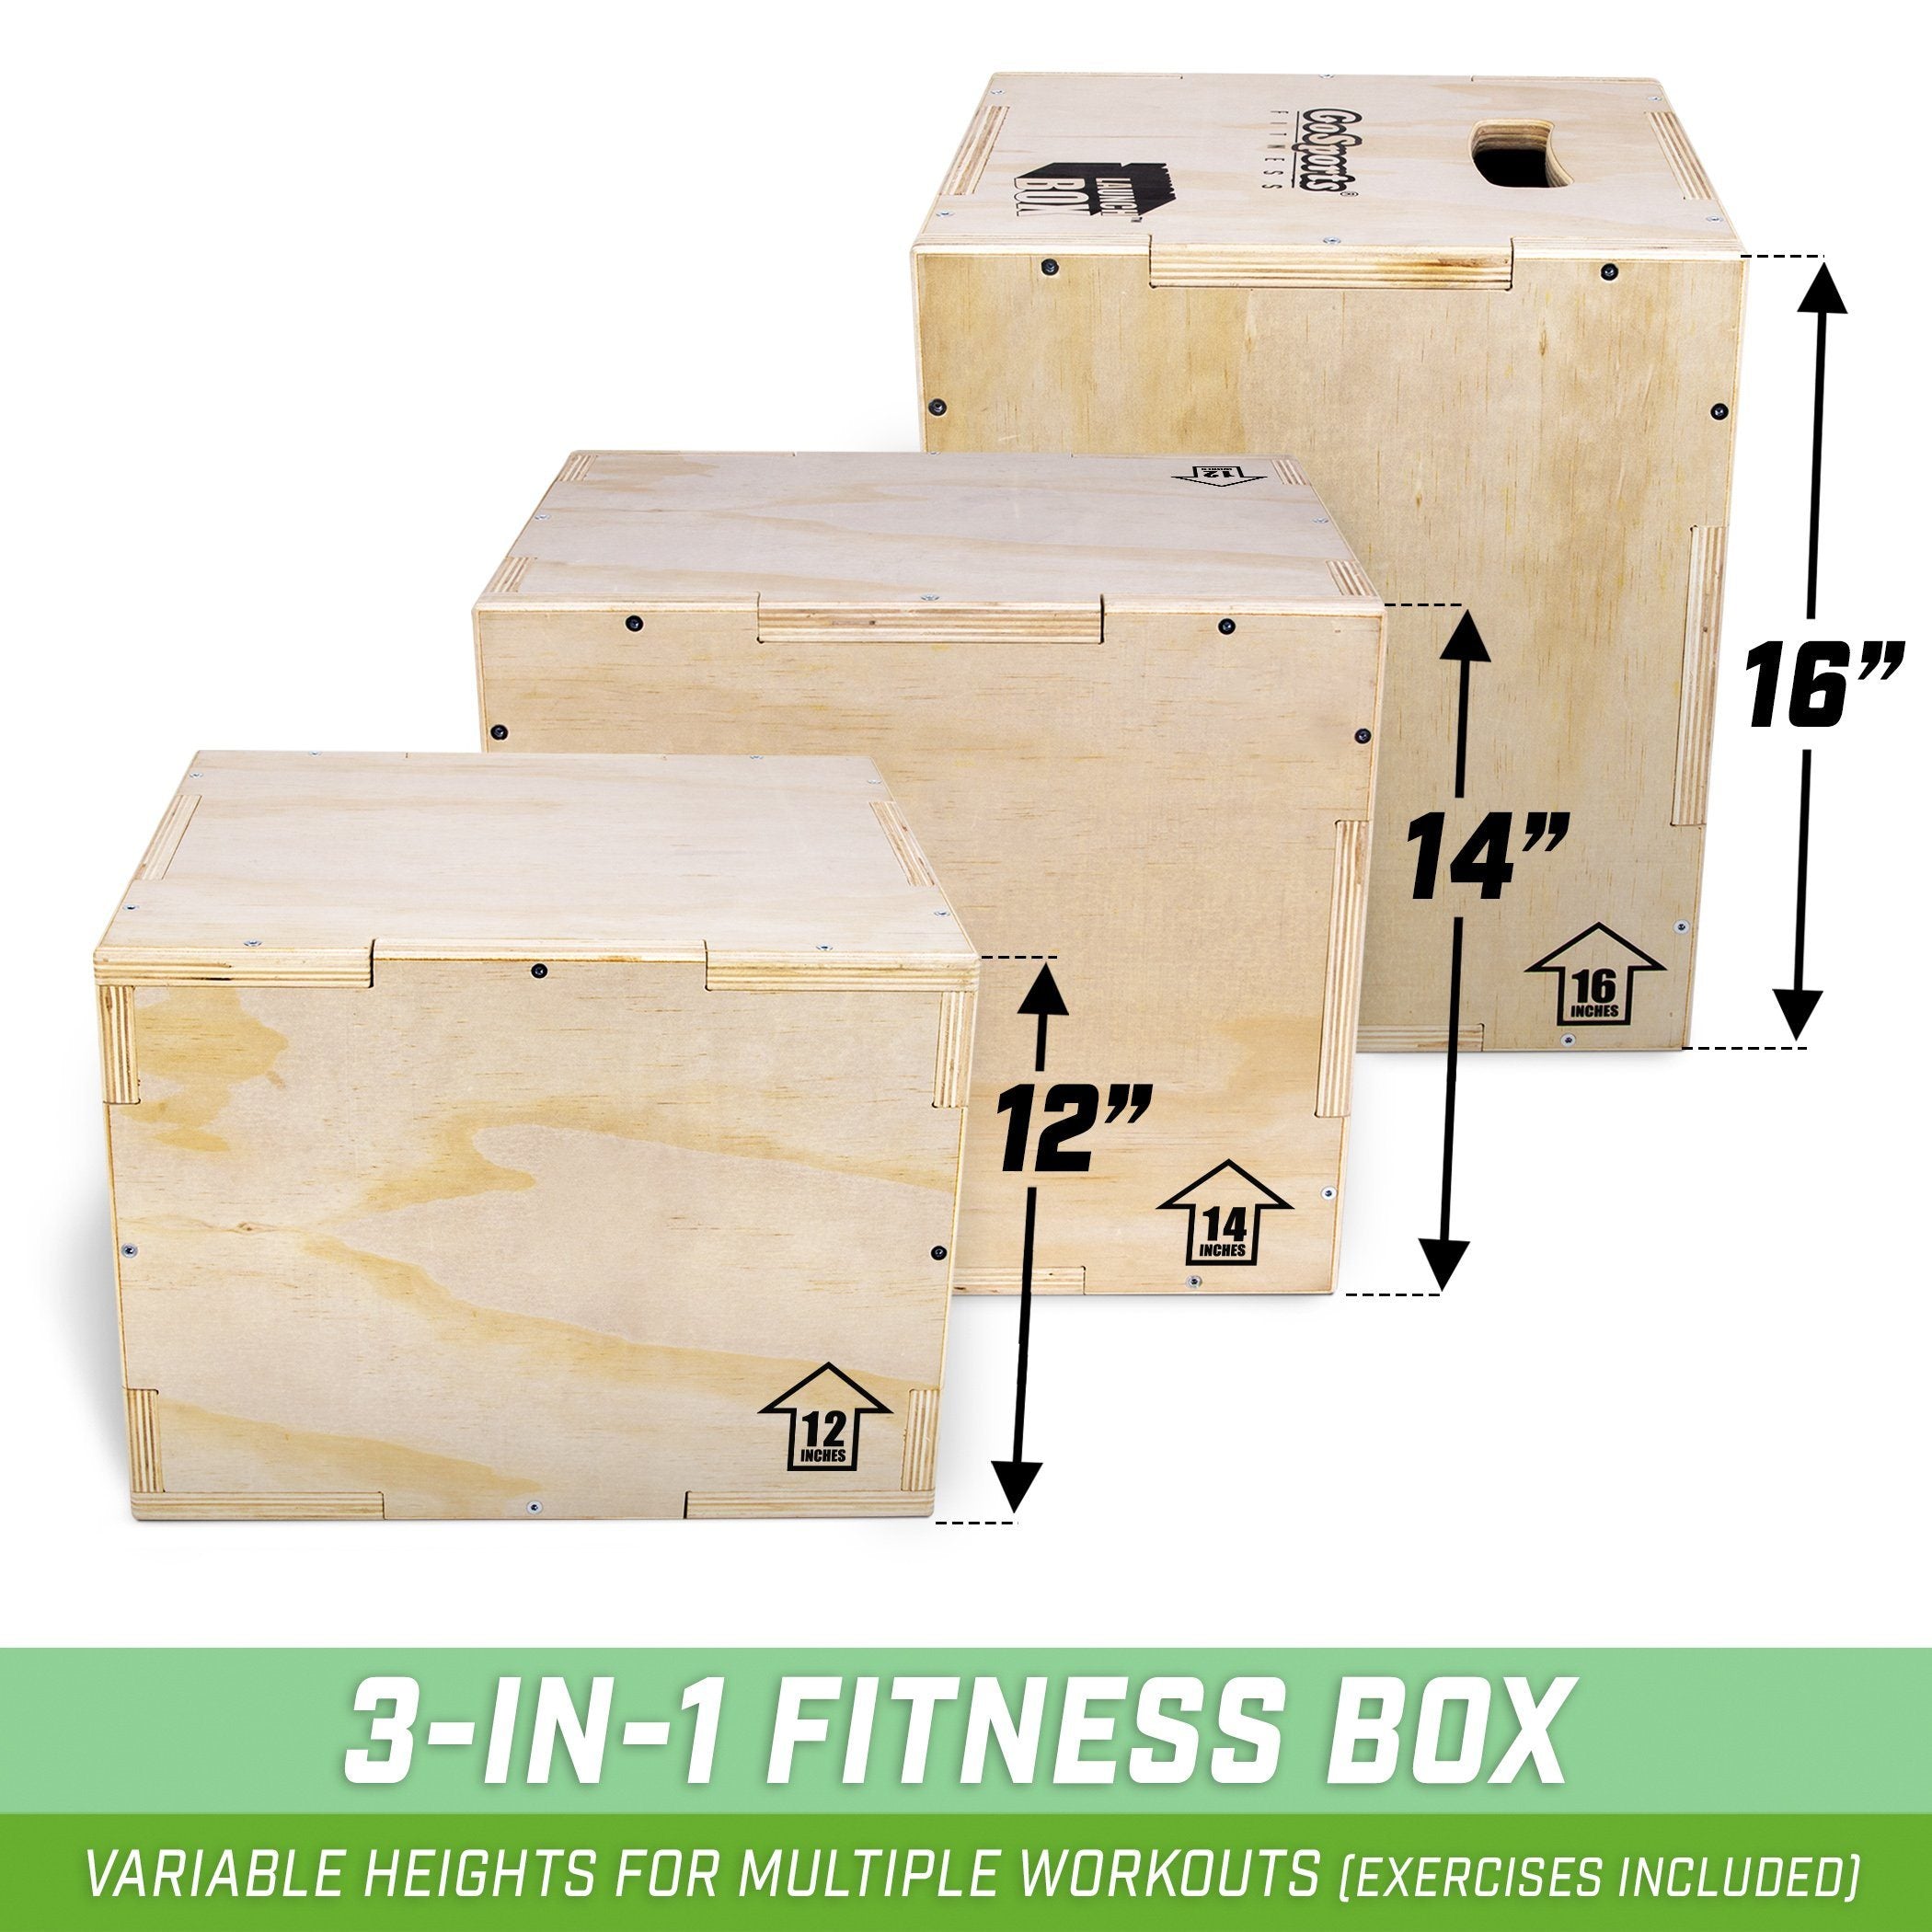 Box Jump Height Standards (and How to Scale Them) - The WOD Life